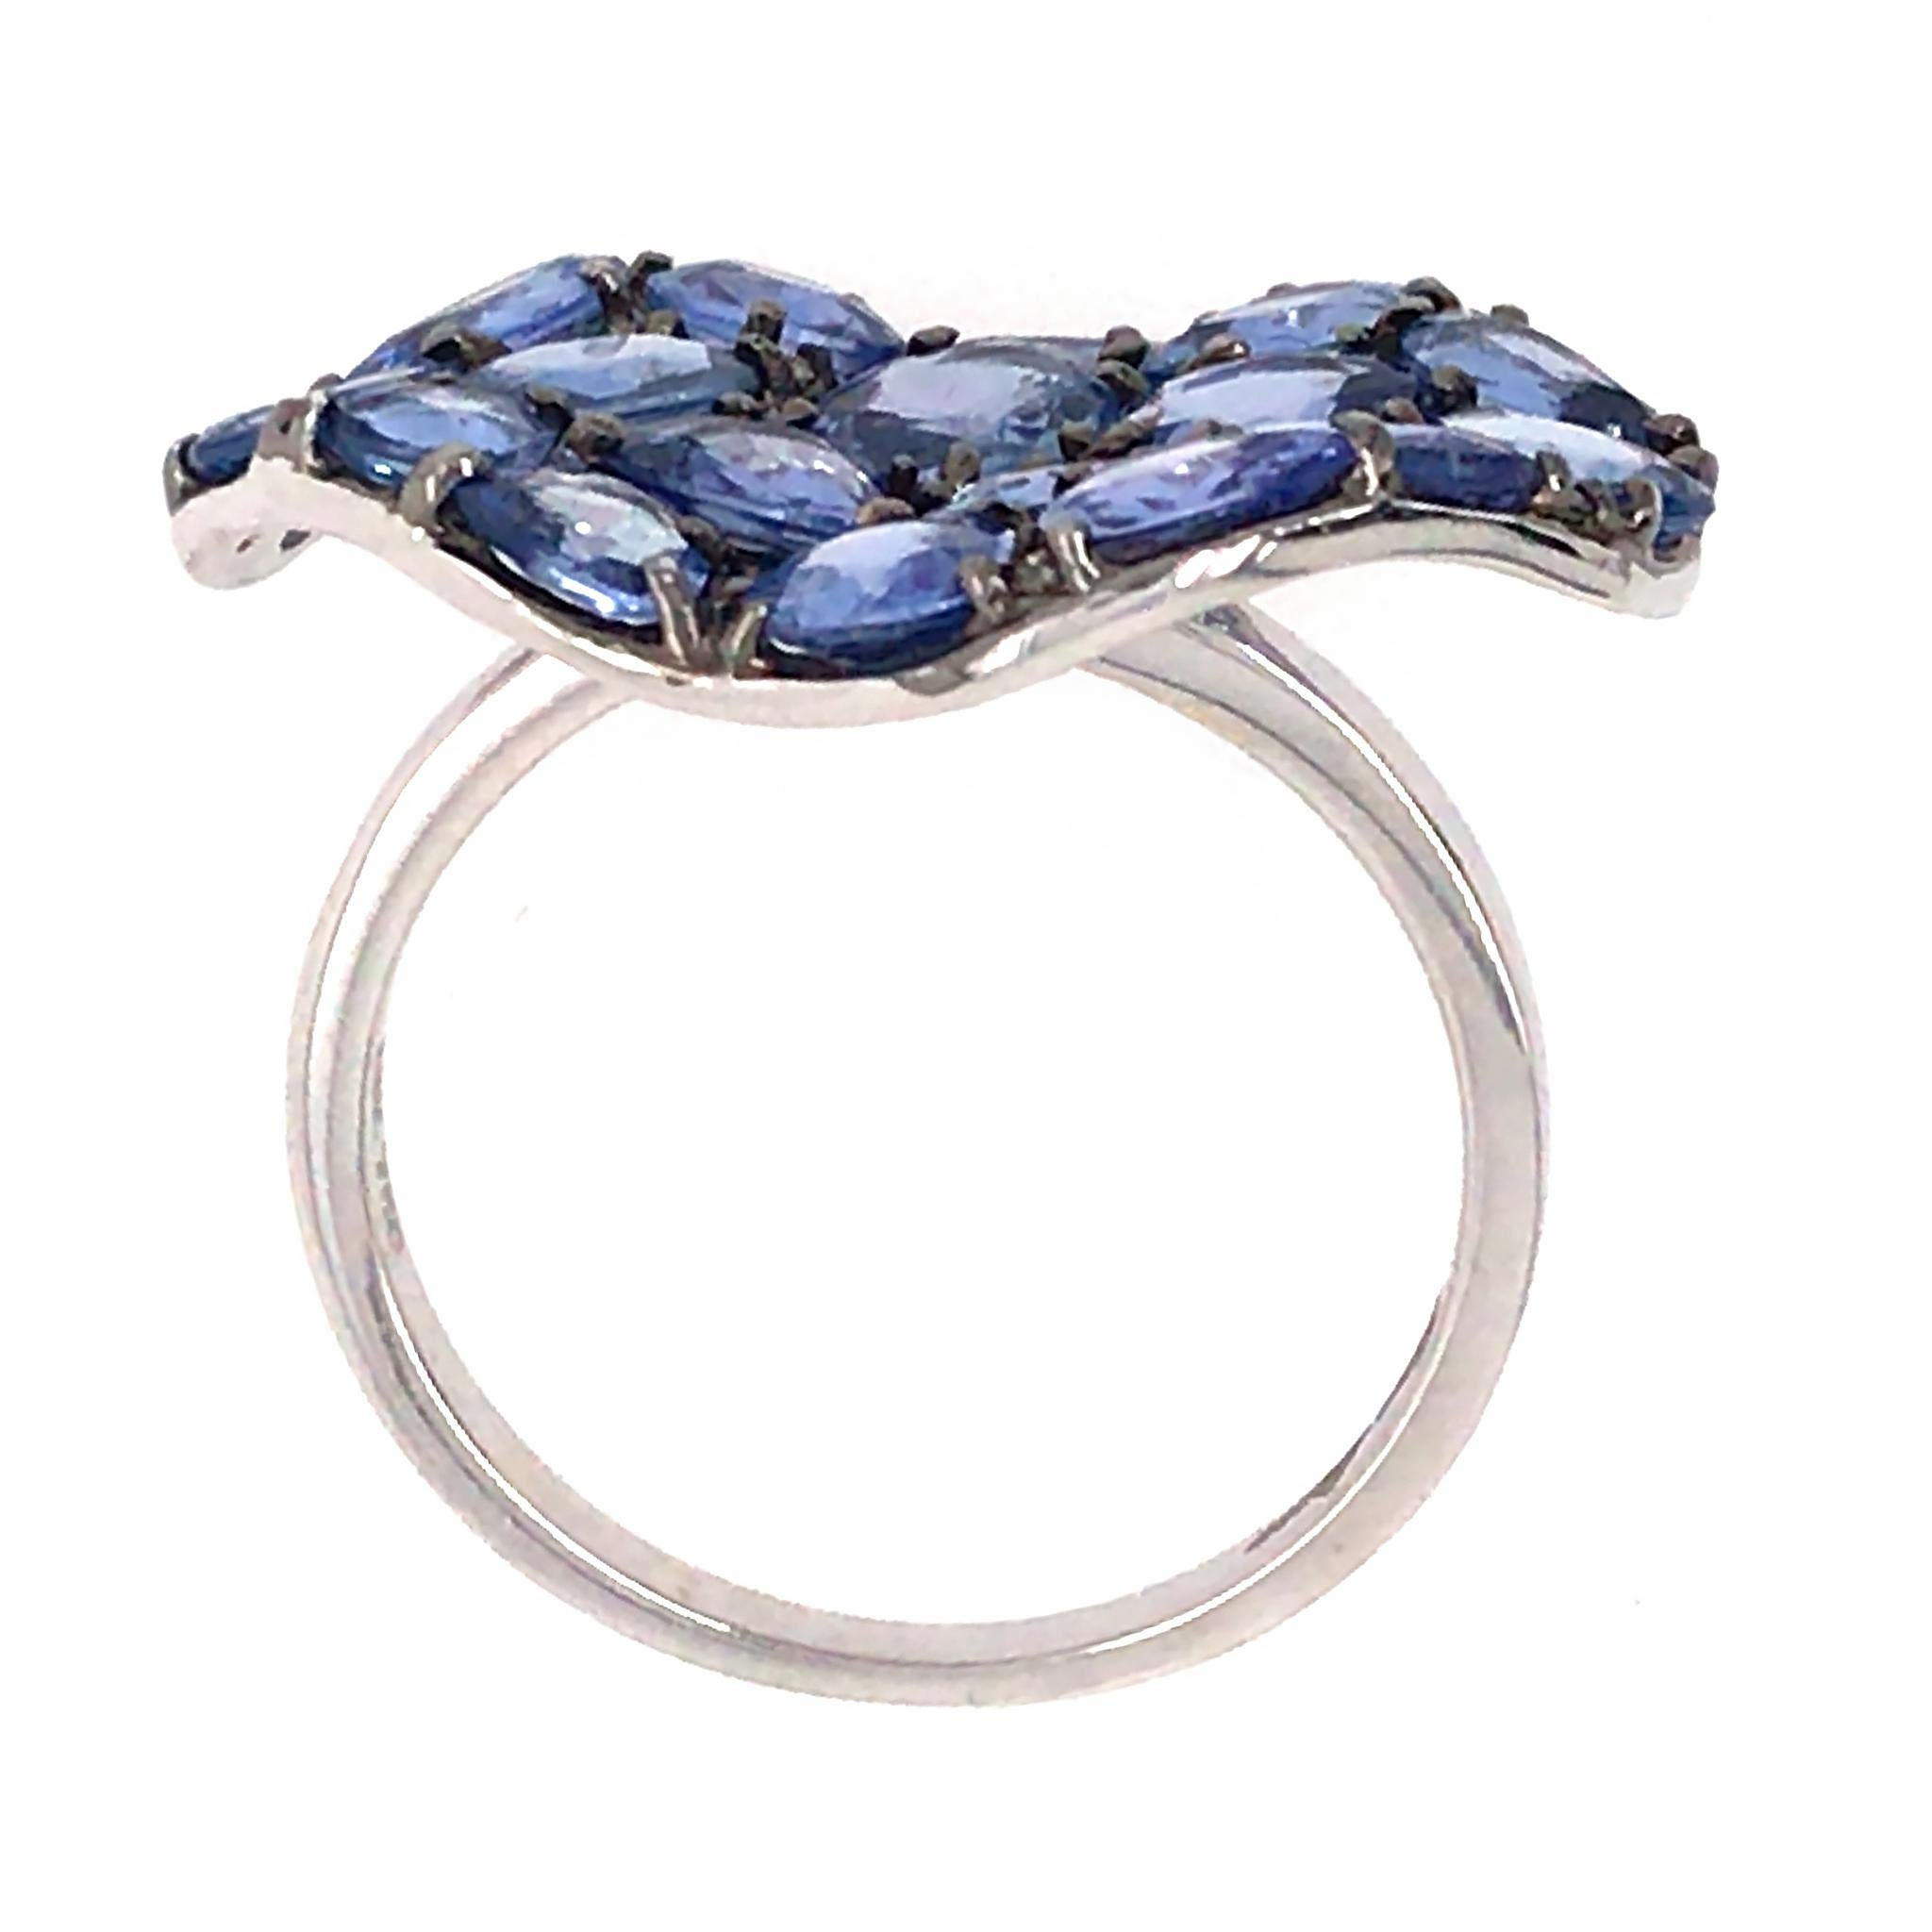 18k White Gold
Diamond: 0.02 ct twd
Blue Sapphire: 5.42 tcw
Ring Size: 7.25
Total Weight: 5.6 grams